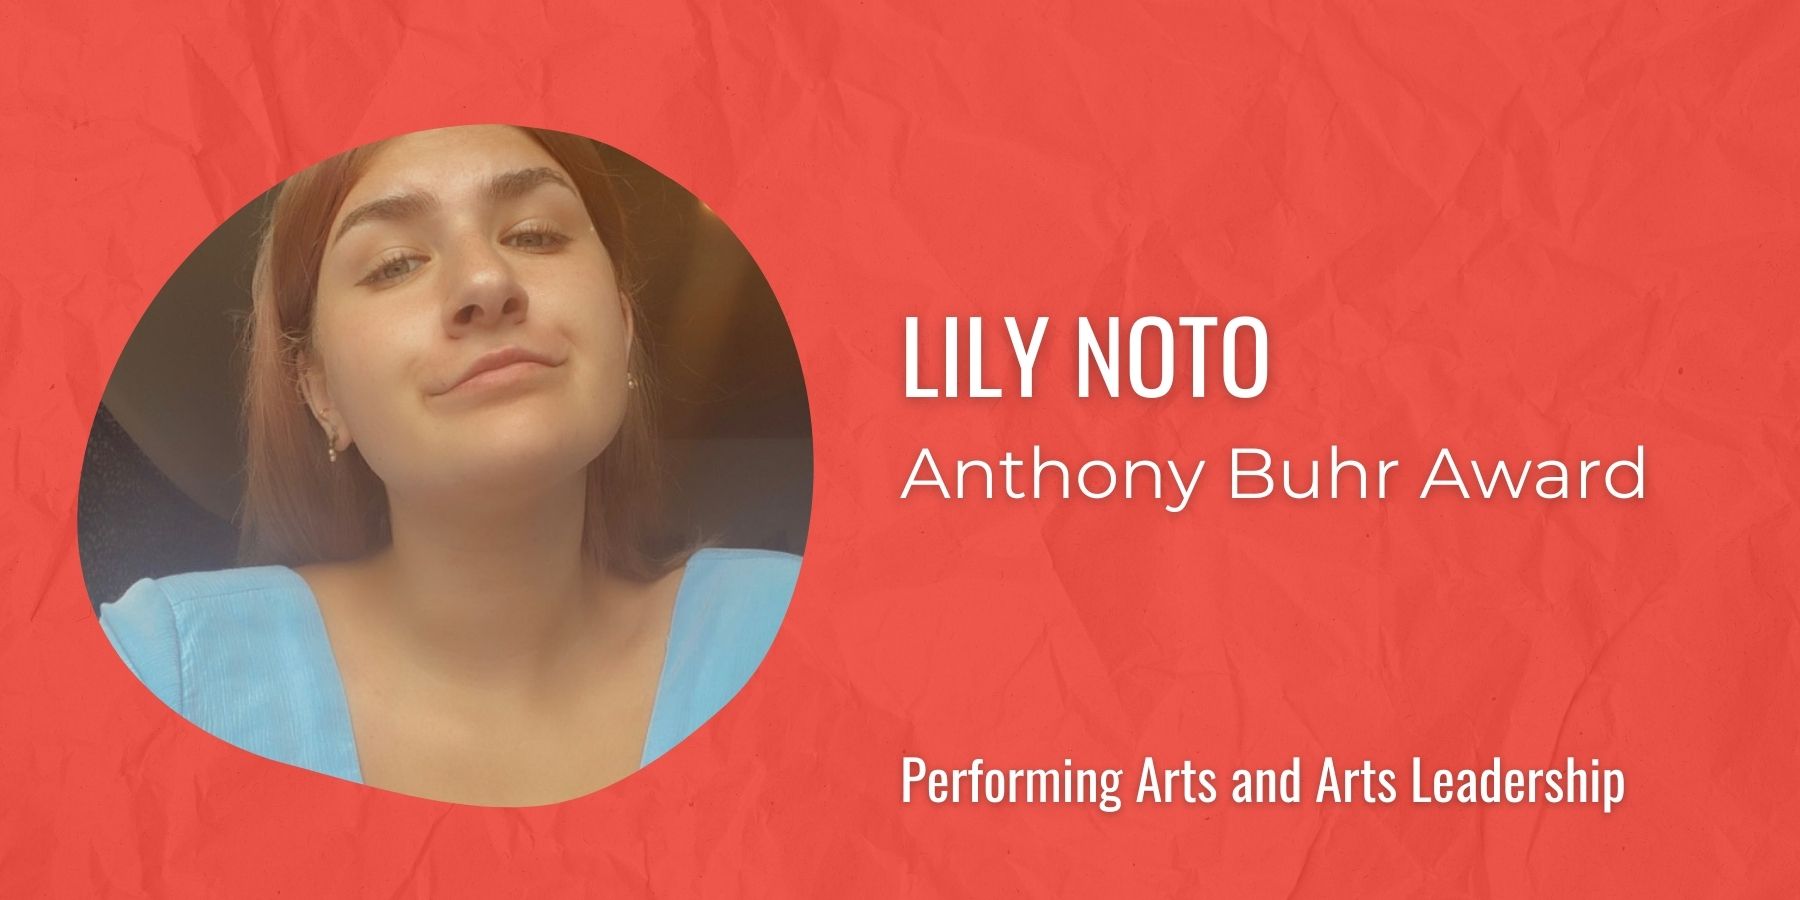 Image of Lily Noto with text: Anthony Buhr Award, Performing Arts and Arts Leadership
